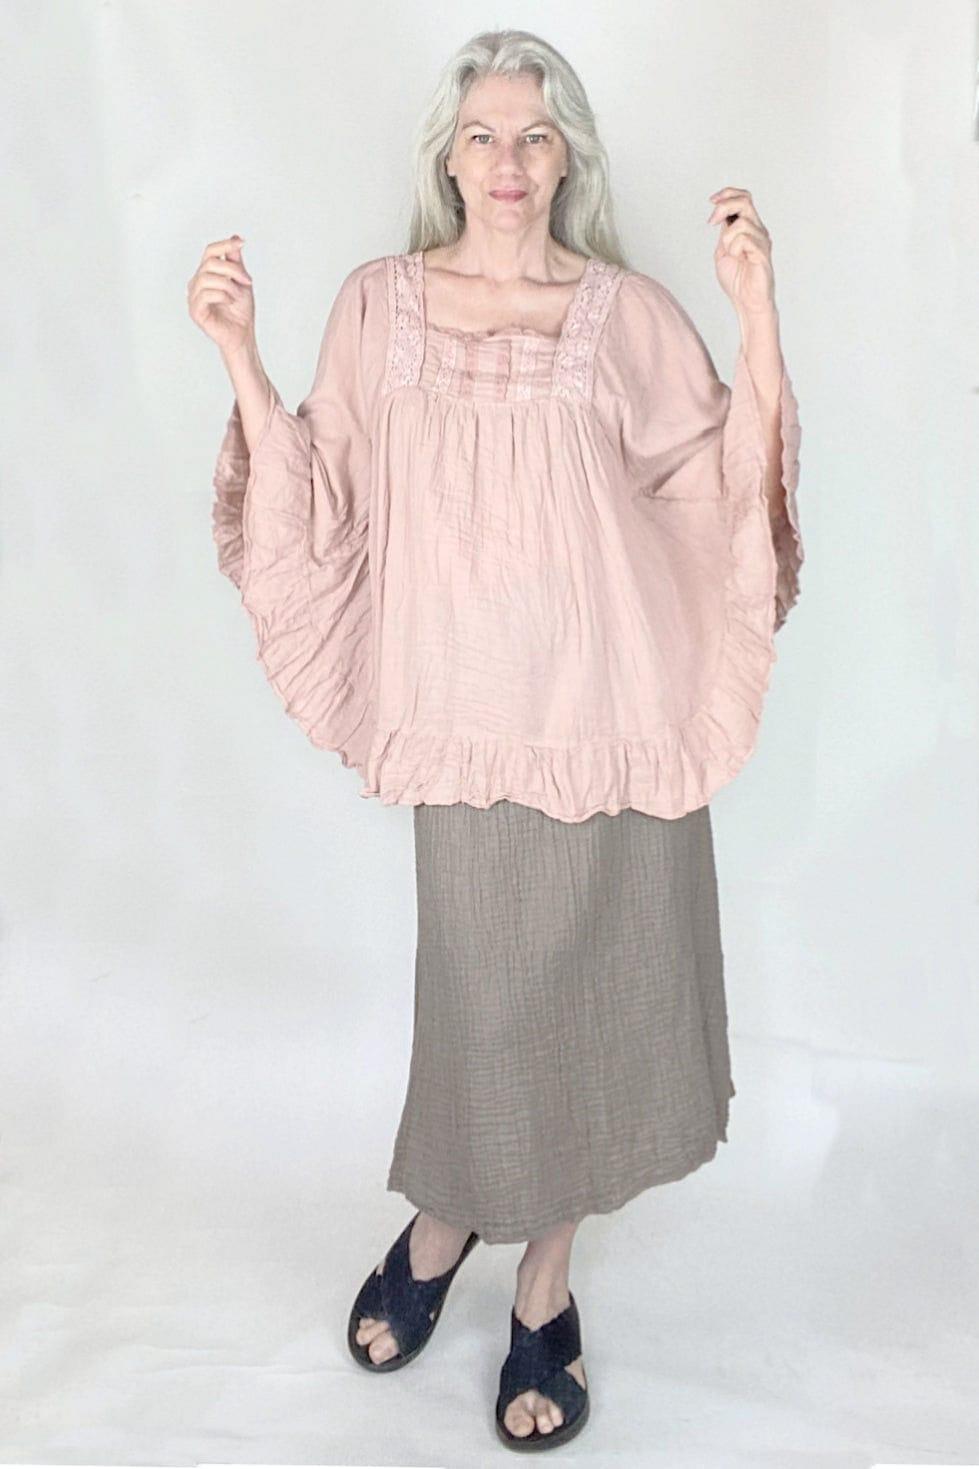 Silver haired woman modeling a pale pink cotton blouse with detail and curved ruffle hemline. Also wearing a soft beige simple cut cotton skirt.